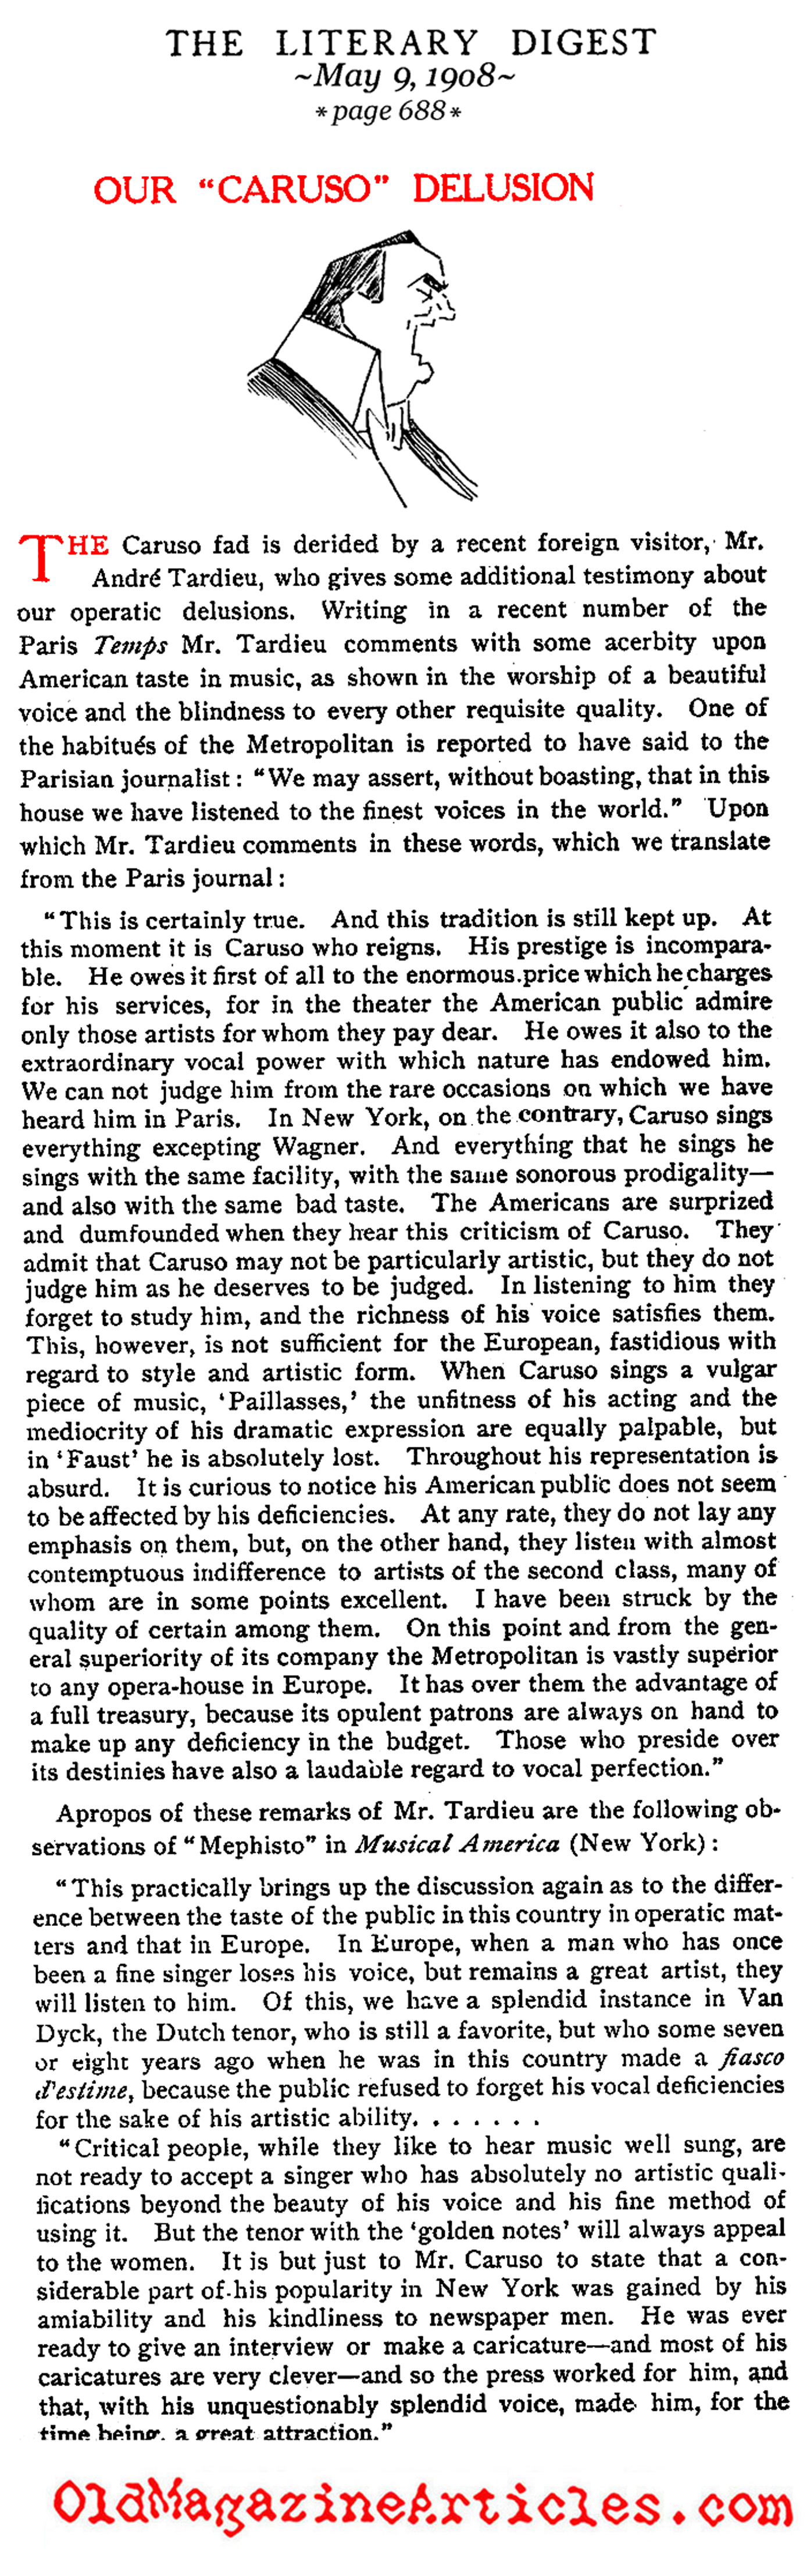 A Bad Review for Enrico Caruso  (The Literary Digest, 1908)